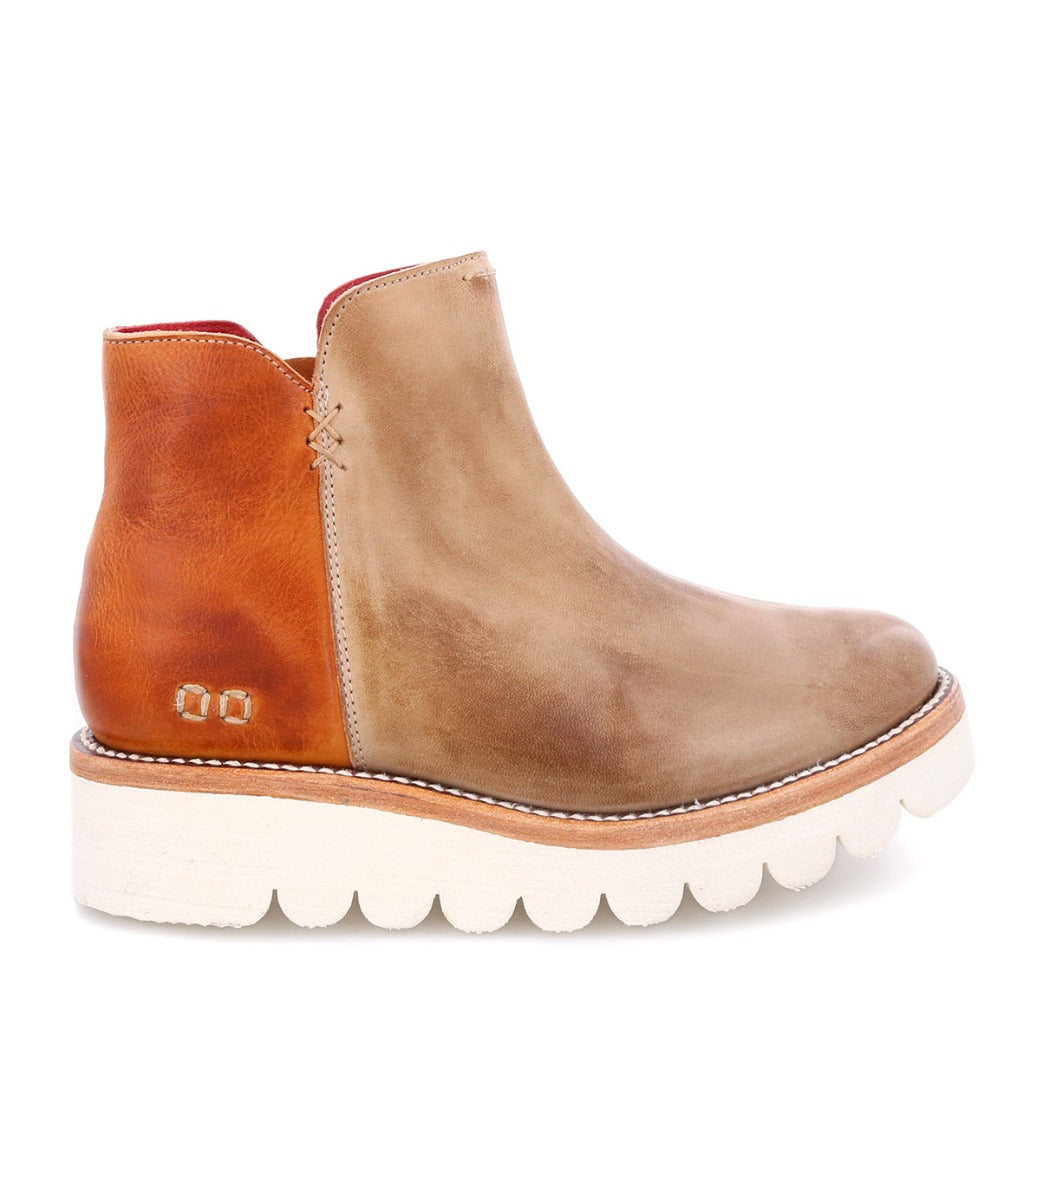 A women's ankle boot in tan and brown called Lydyi by Bed Stu.